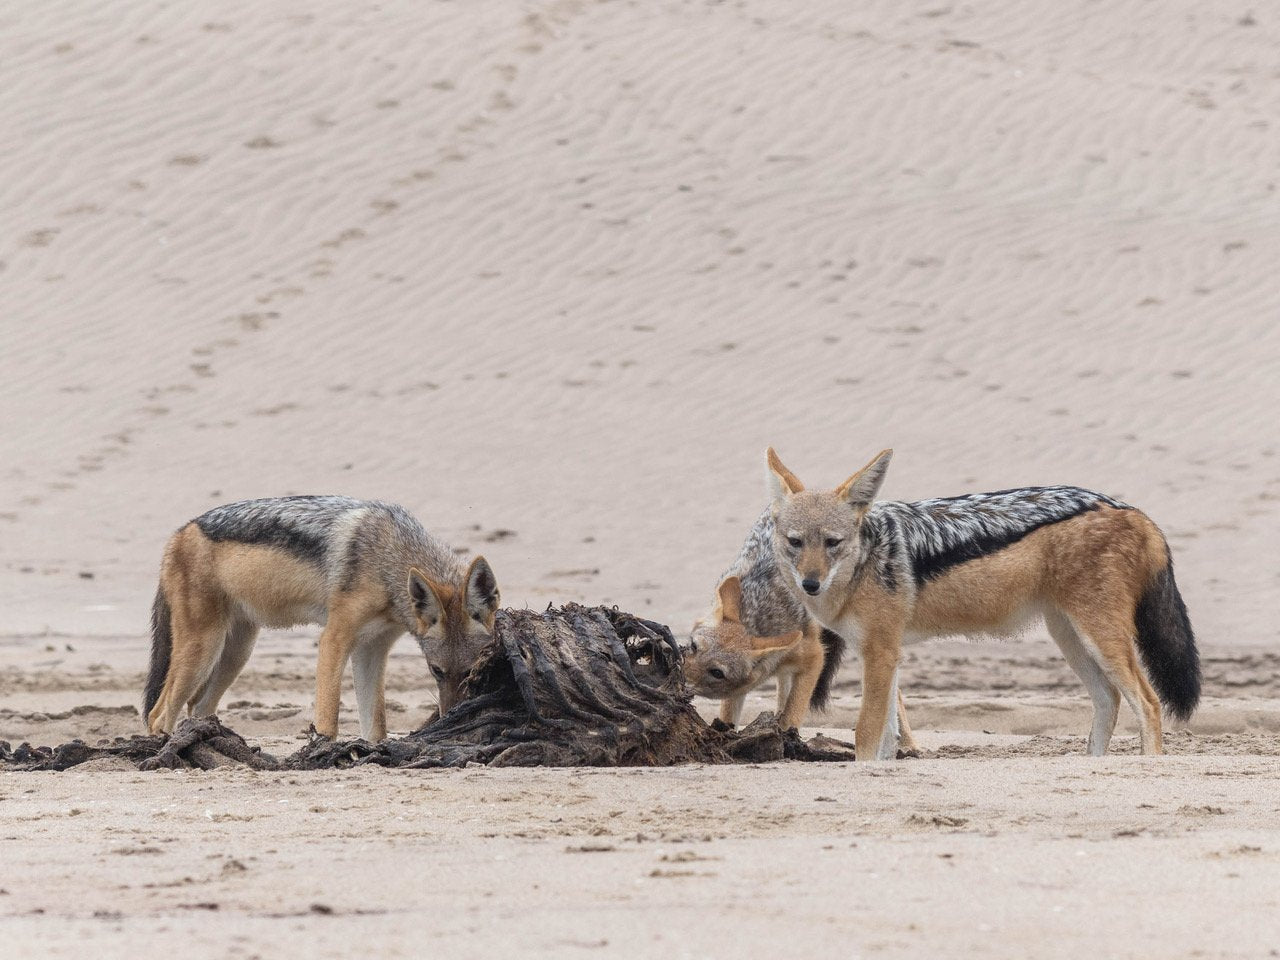 A group of wolves eating a dead body, Namibia #19, Africa